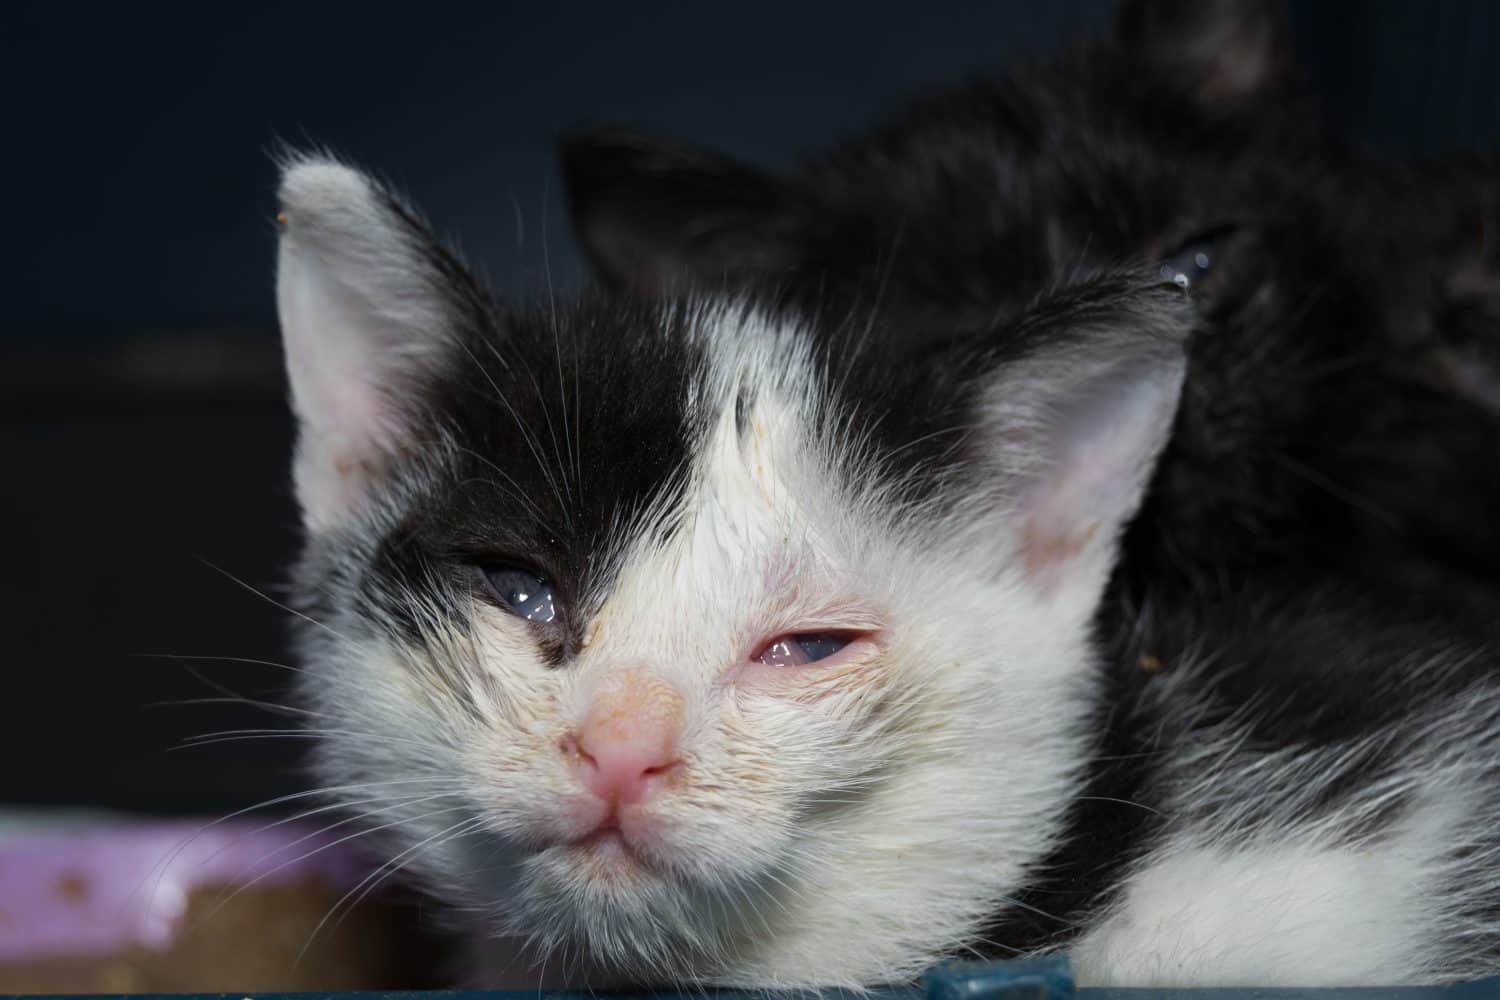 Kittens with conjunctivitis and corneal ulcer